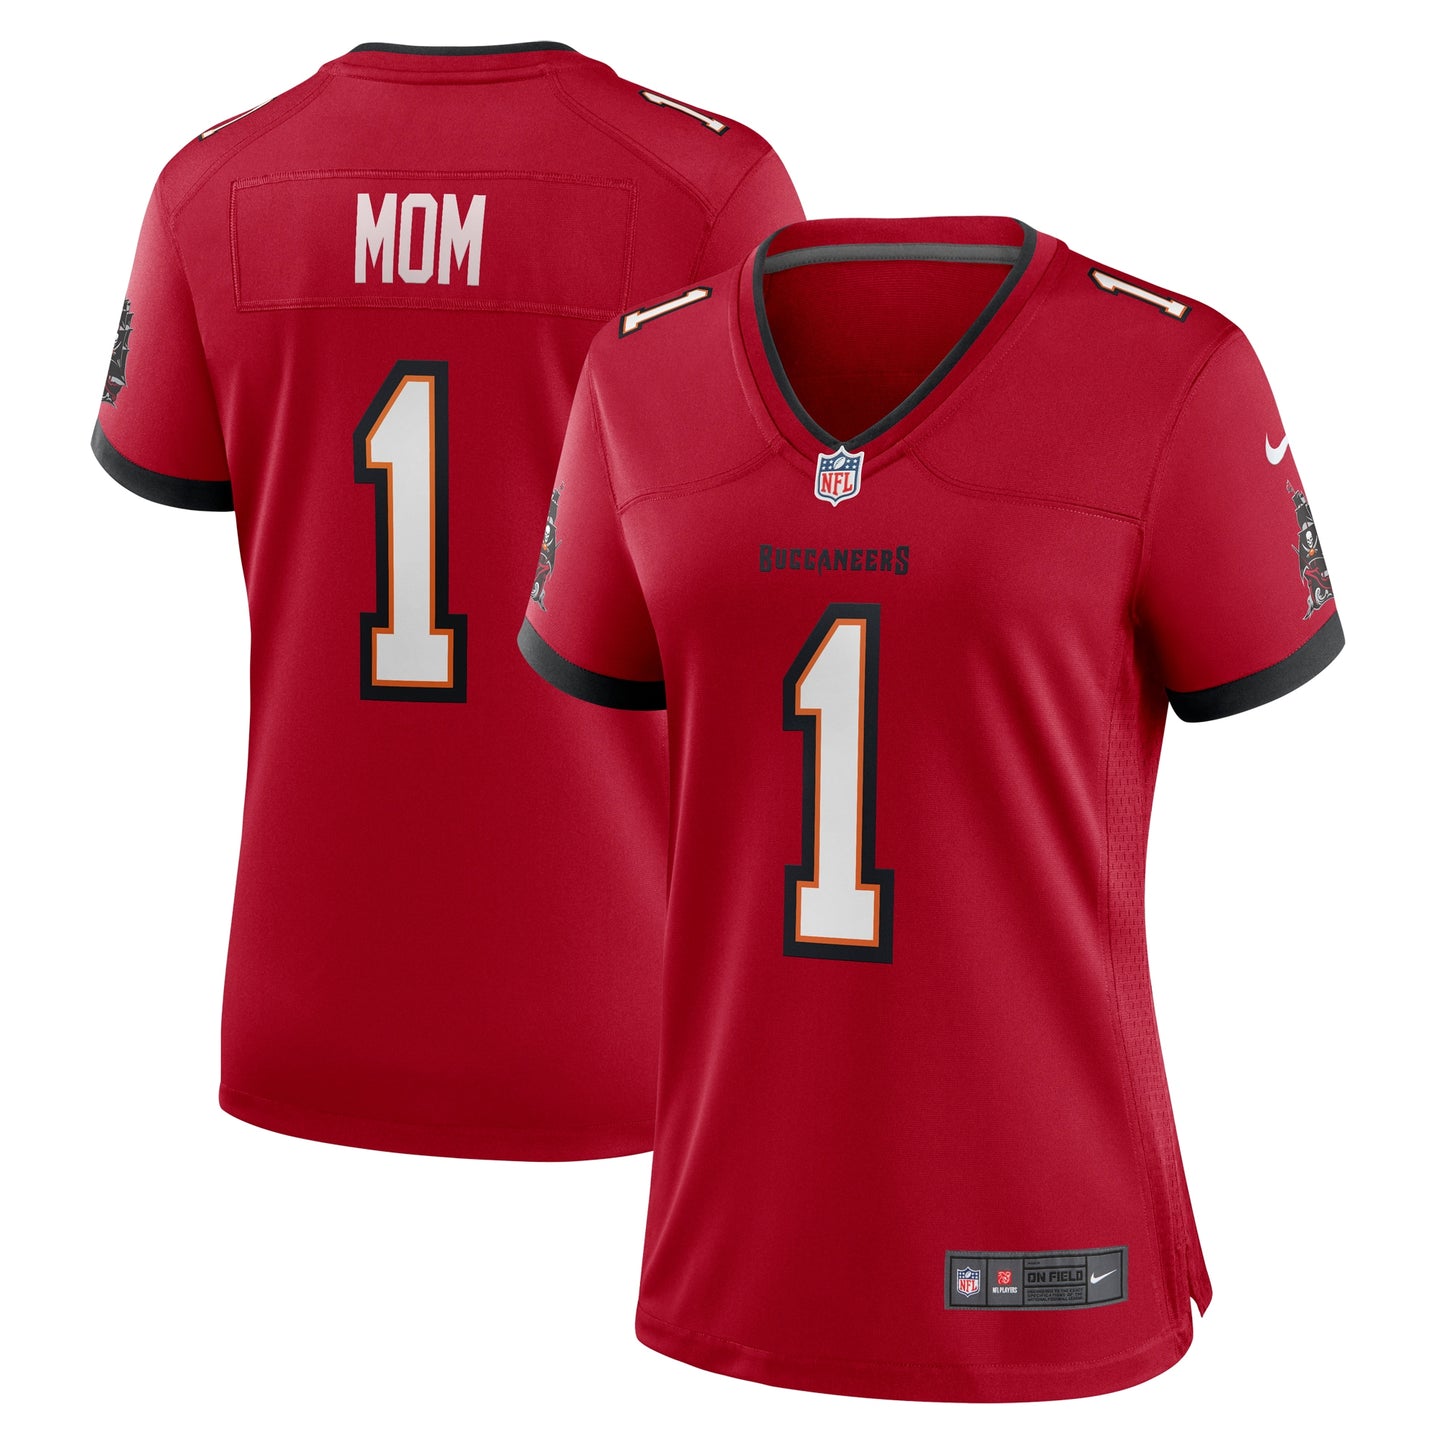 Number 1 Mom Tampa Bay Buccaneers Nike Women's Game Jersey - Red